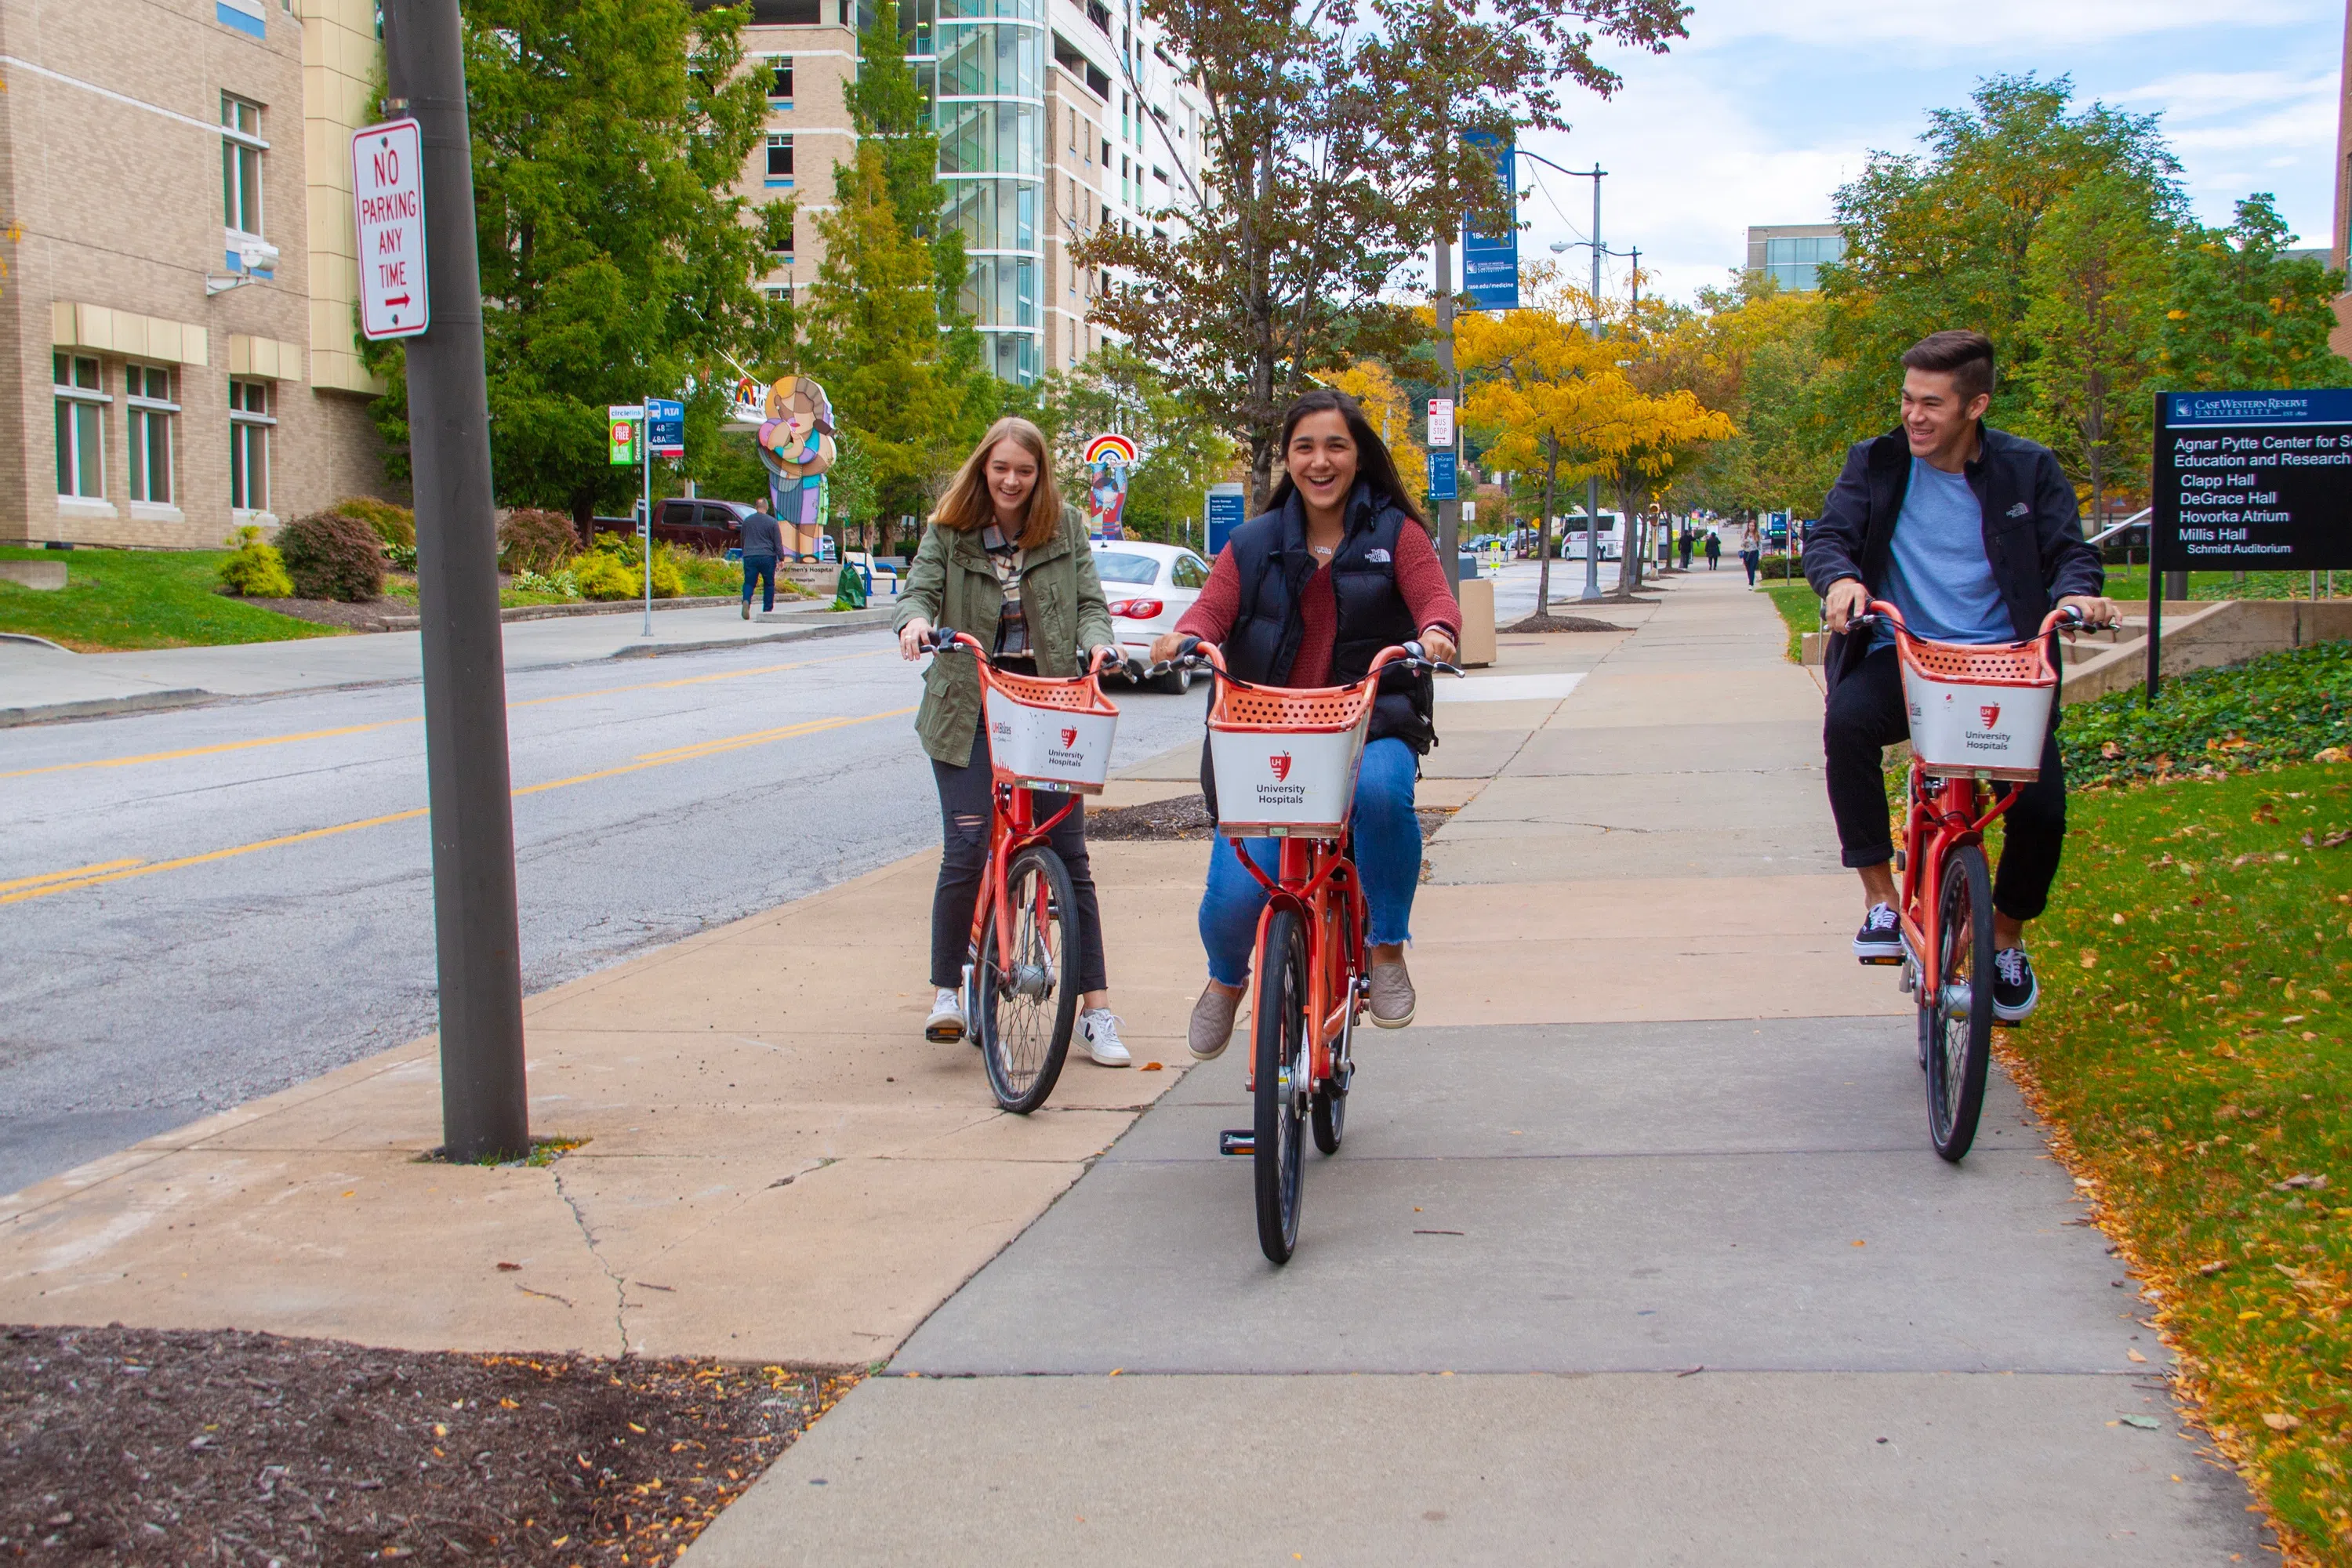 Students ride bikes in front of University Hospitals on CWRU's campus